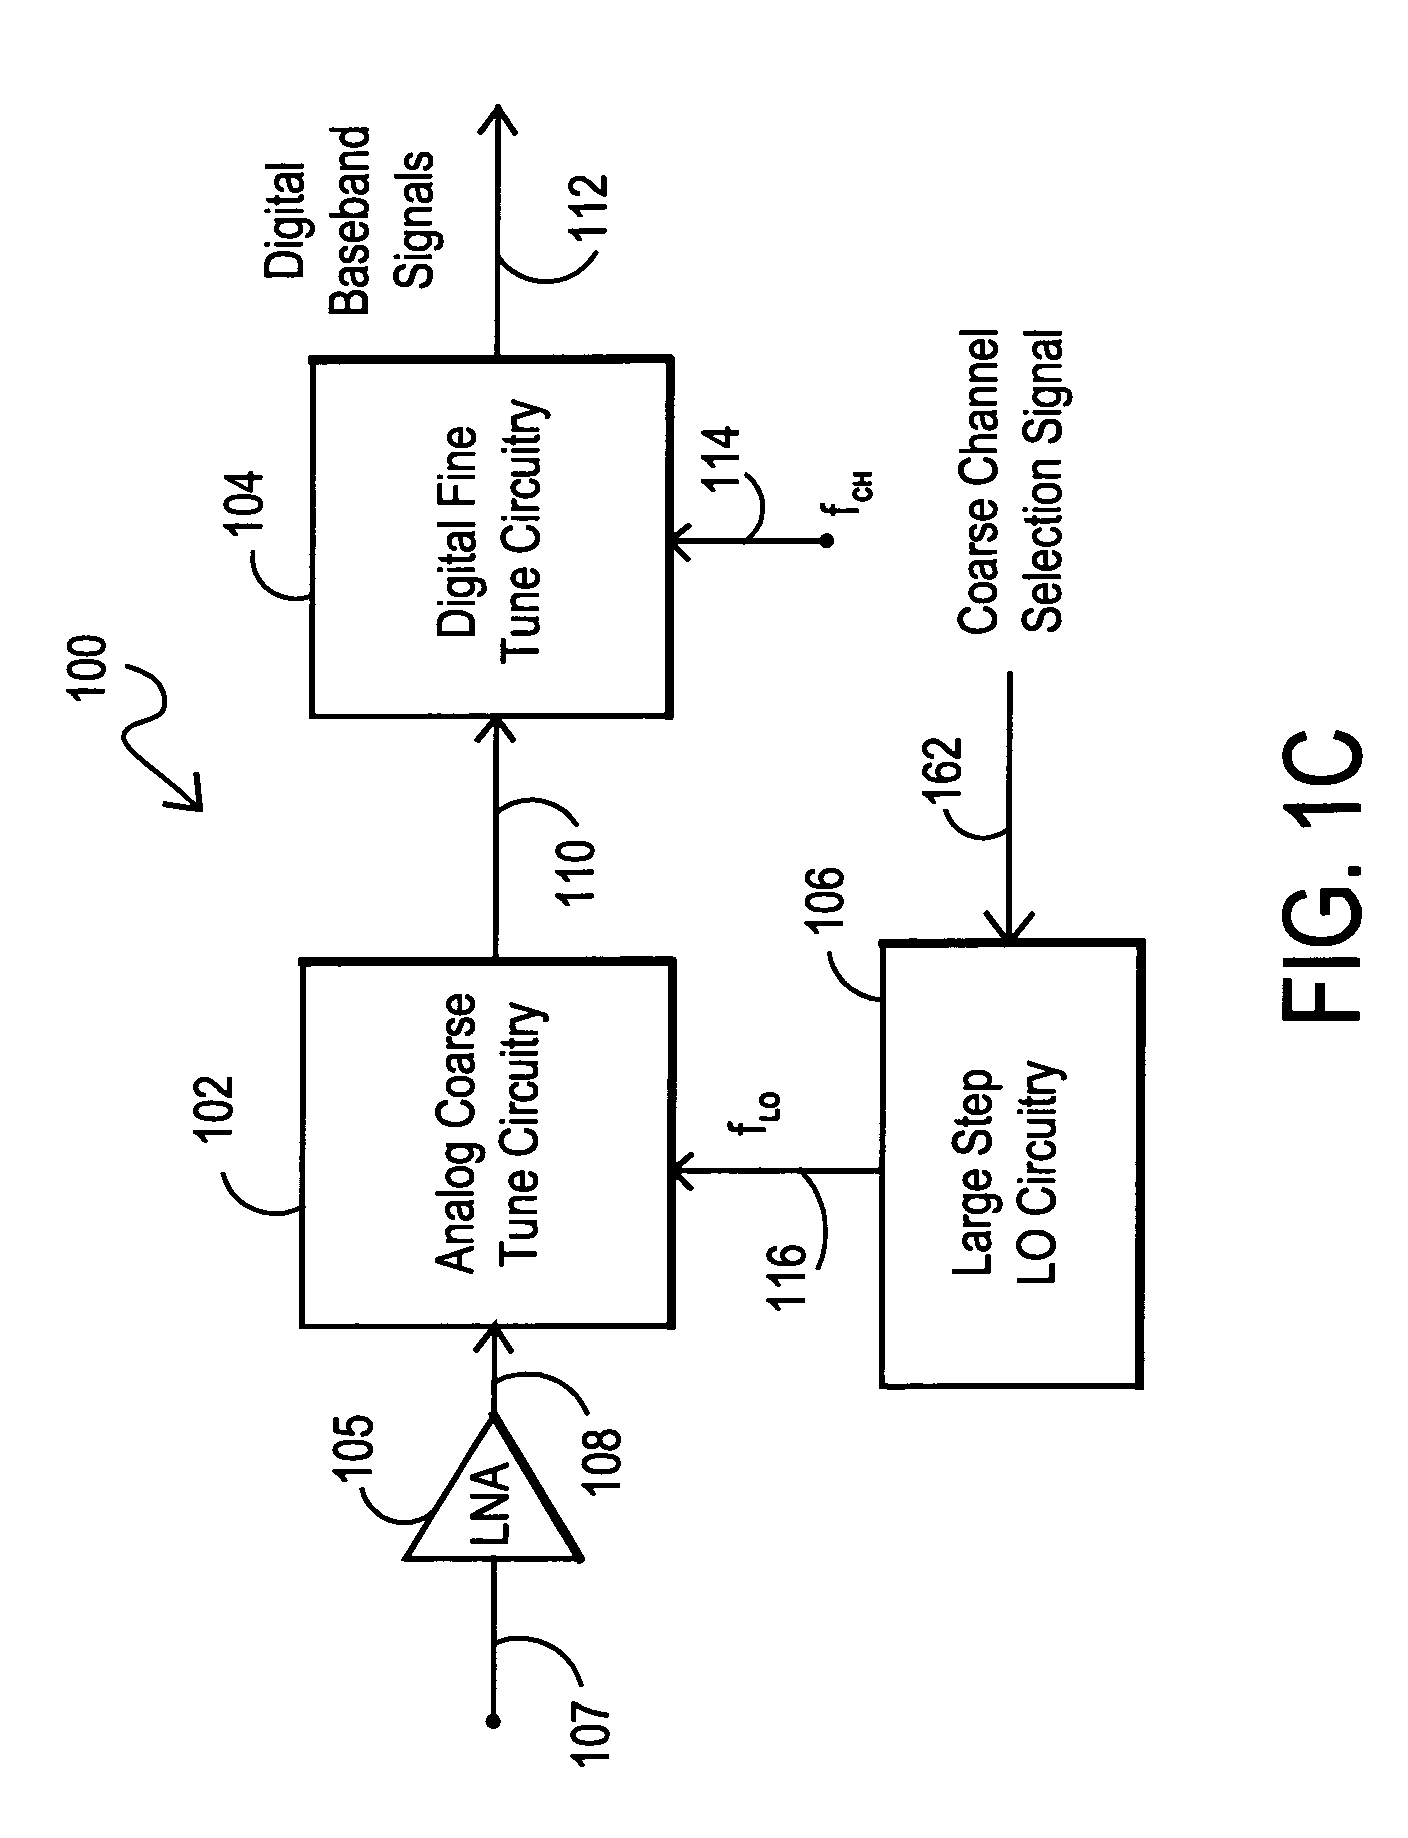 Receiver architectures utilizing coarse analog tuning and associated methods